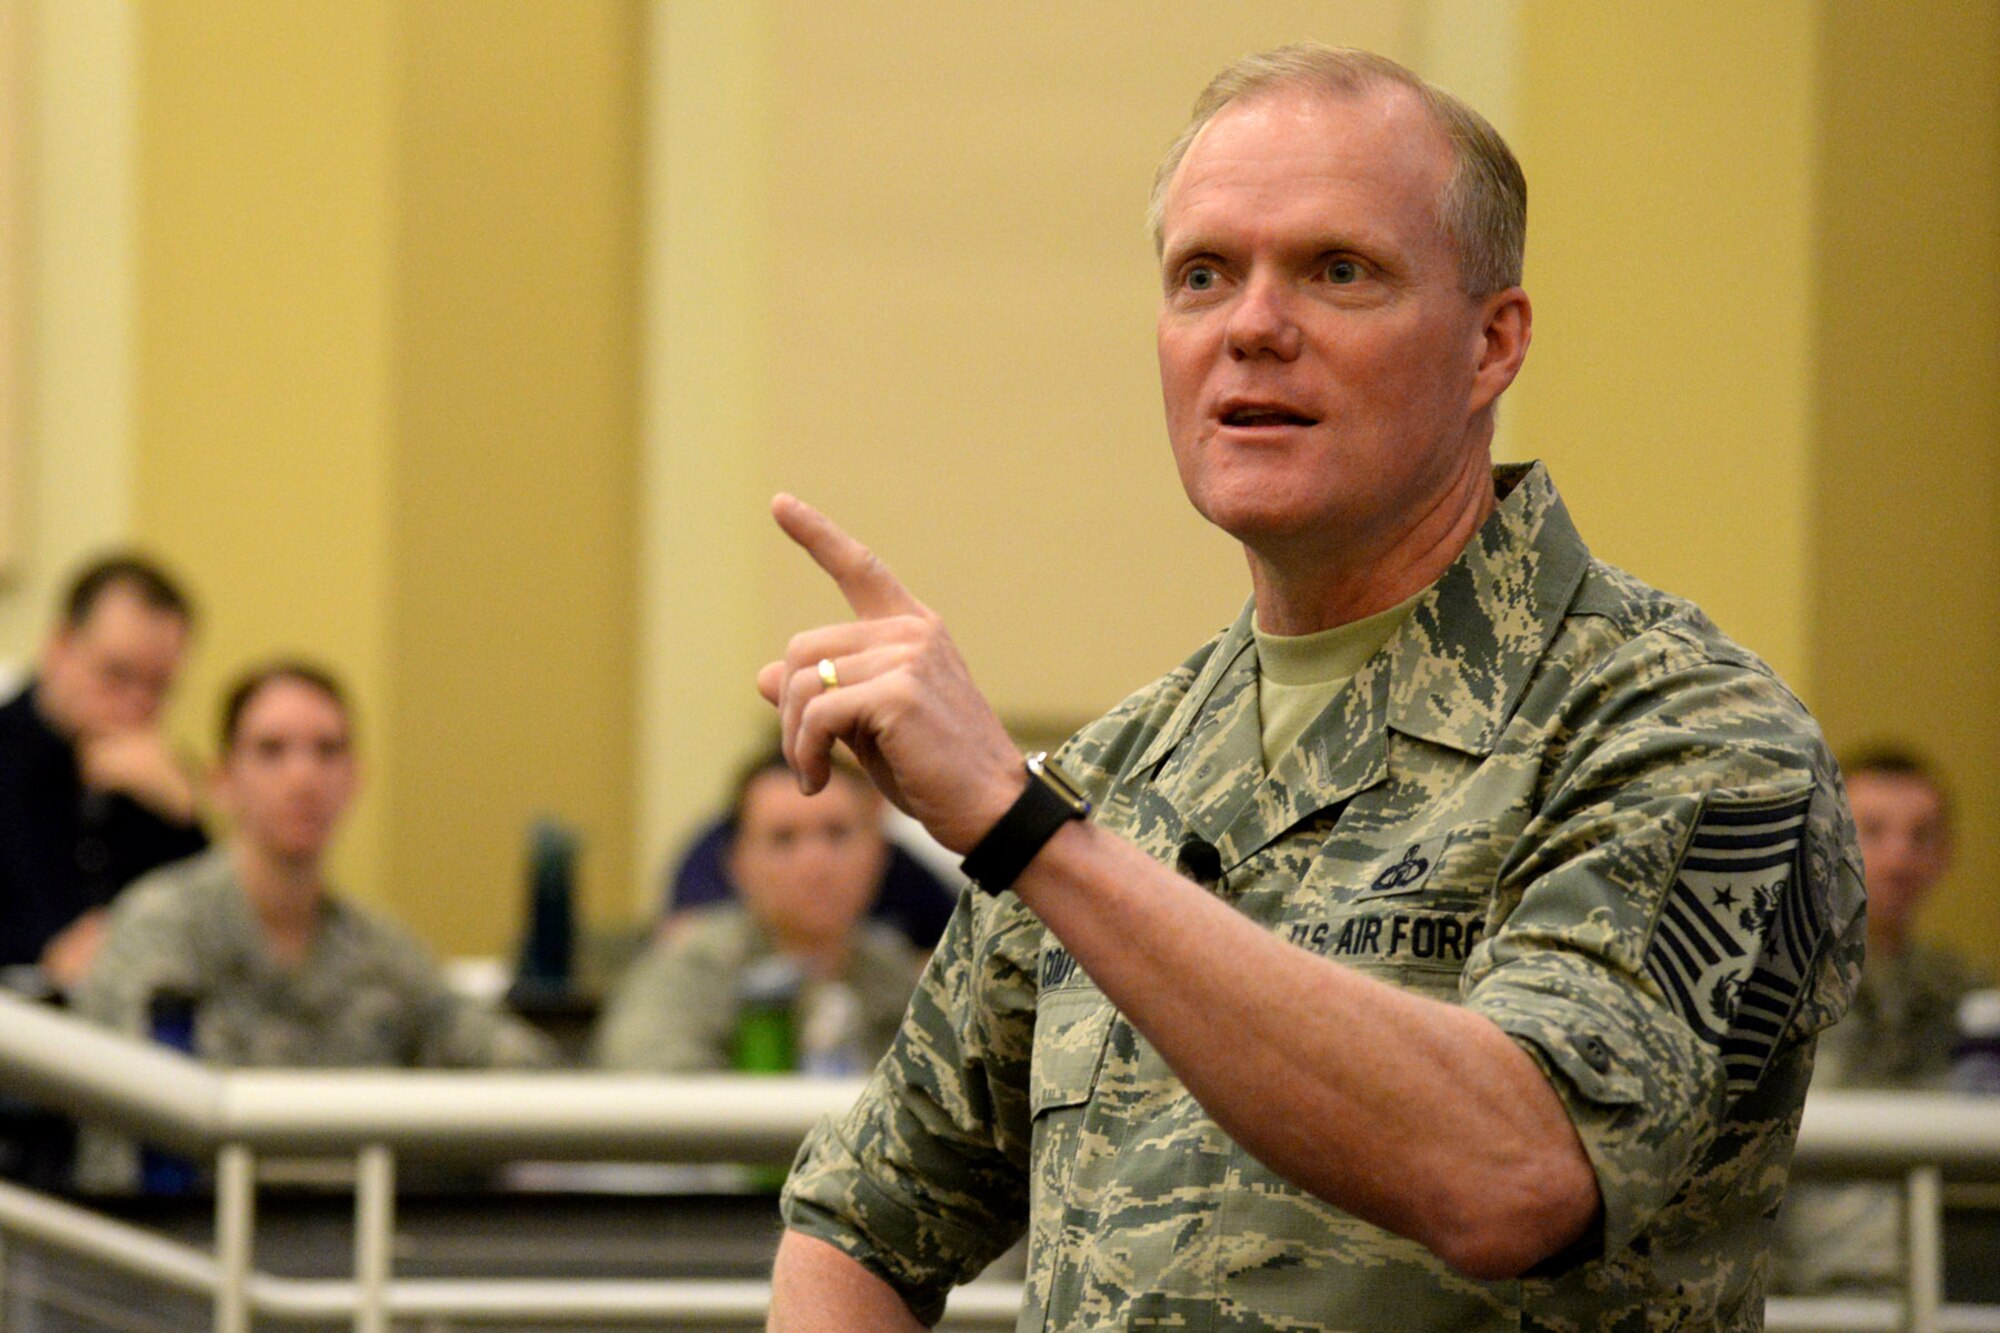 Chief Master Sergeant of the Air Force James Cody speaks to attendees during the National Capital region Joint-Service Junior Officer Leadership Summit held at the General Jacob E. Smart Conference Center on Joint Base Andrews, Md., April 15, 2016. The course is designed to develop joint service junior officers by exchanging ideas with their peers and through mentoring by senior military leadership. (U.S. Air Force photo/Tech. Sgt. Matt Davis)